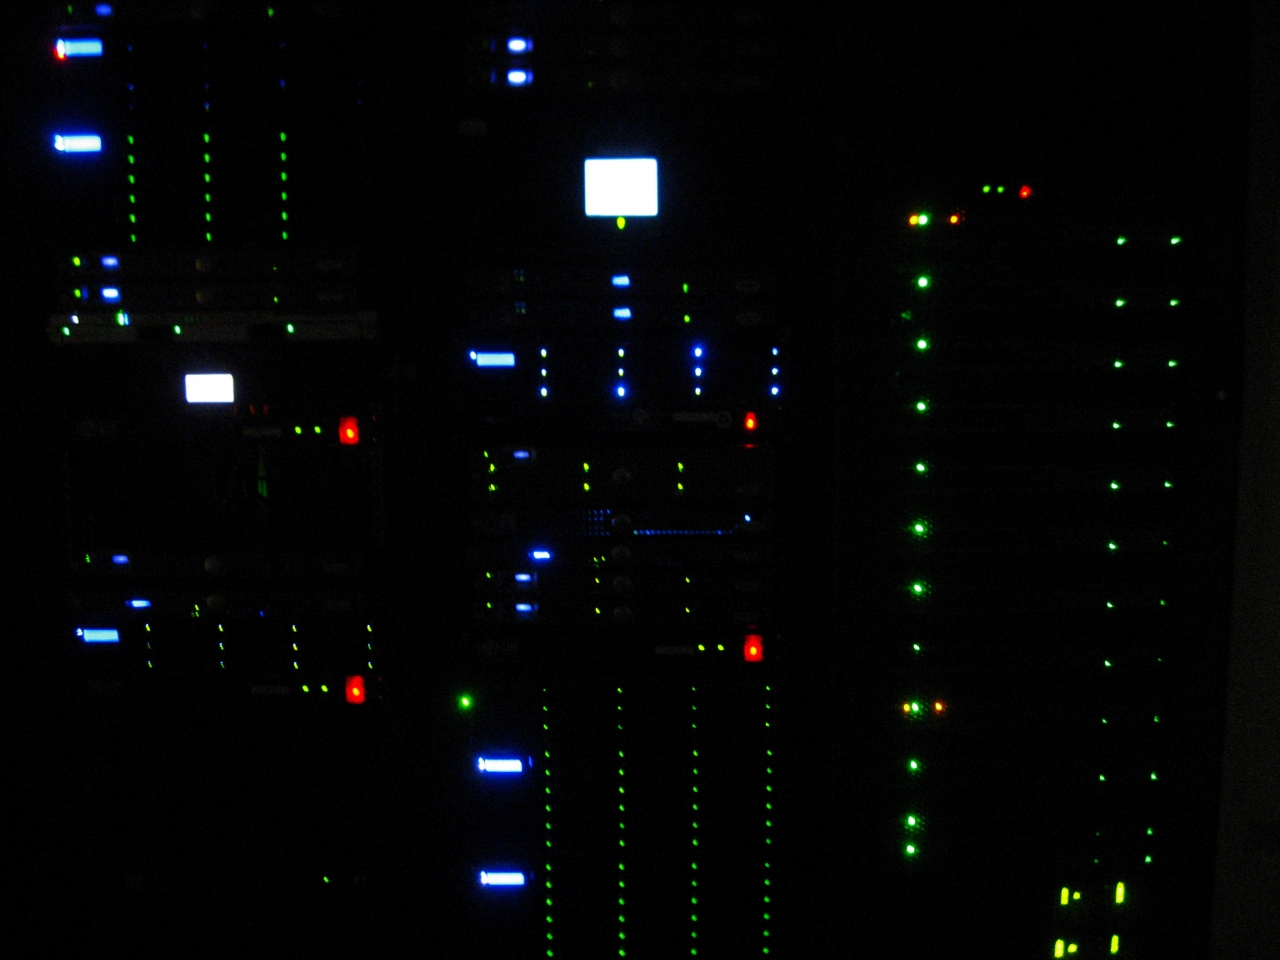 Racks of servers, switches and other network hardware.